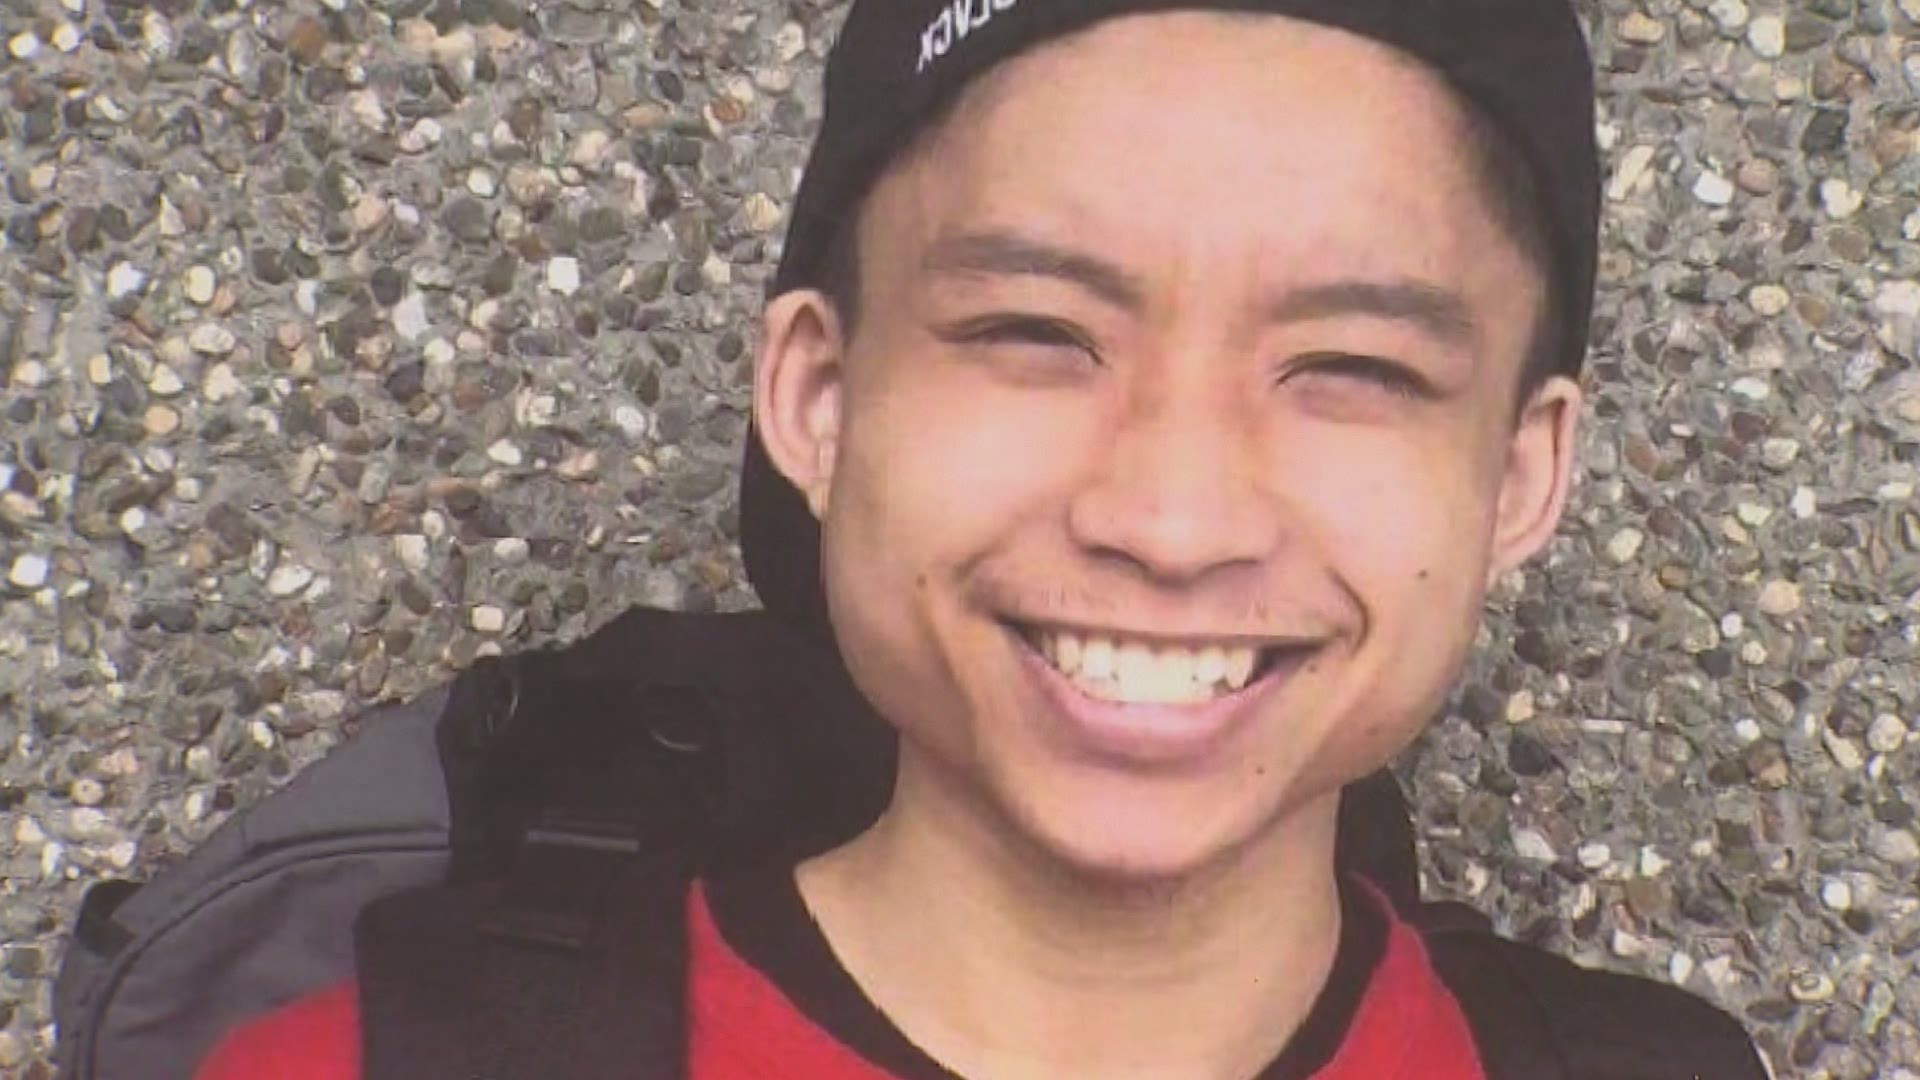 While a settlement has not been confirmed, the family of Tommy Le has scheduled a news conference for Wednesday.